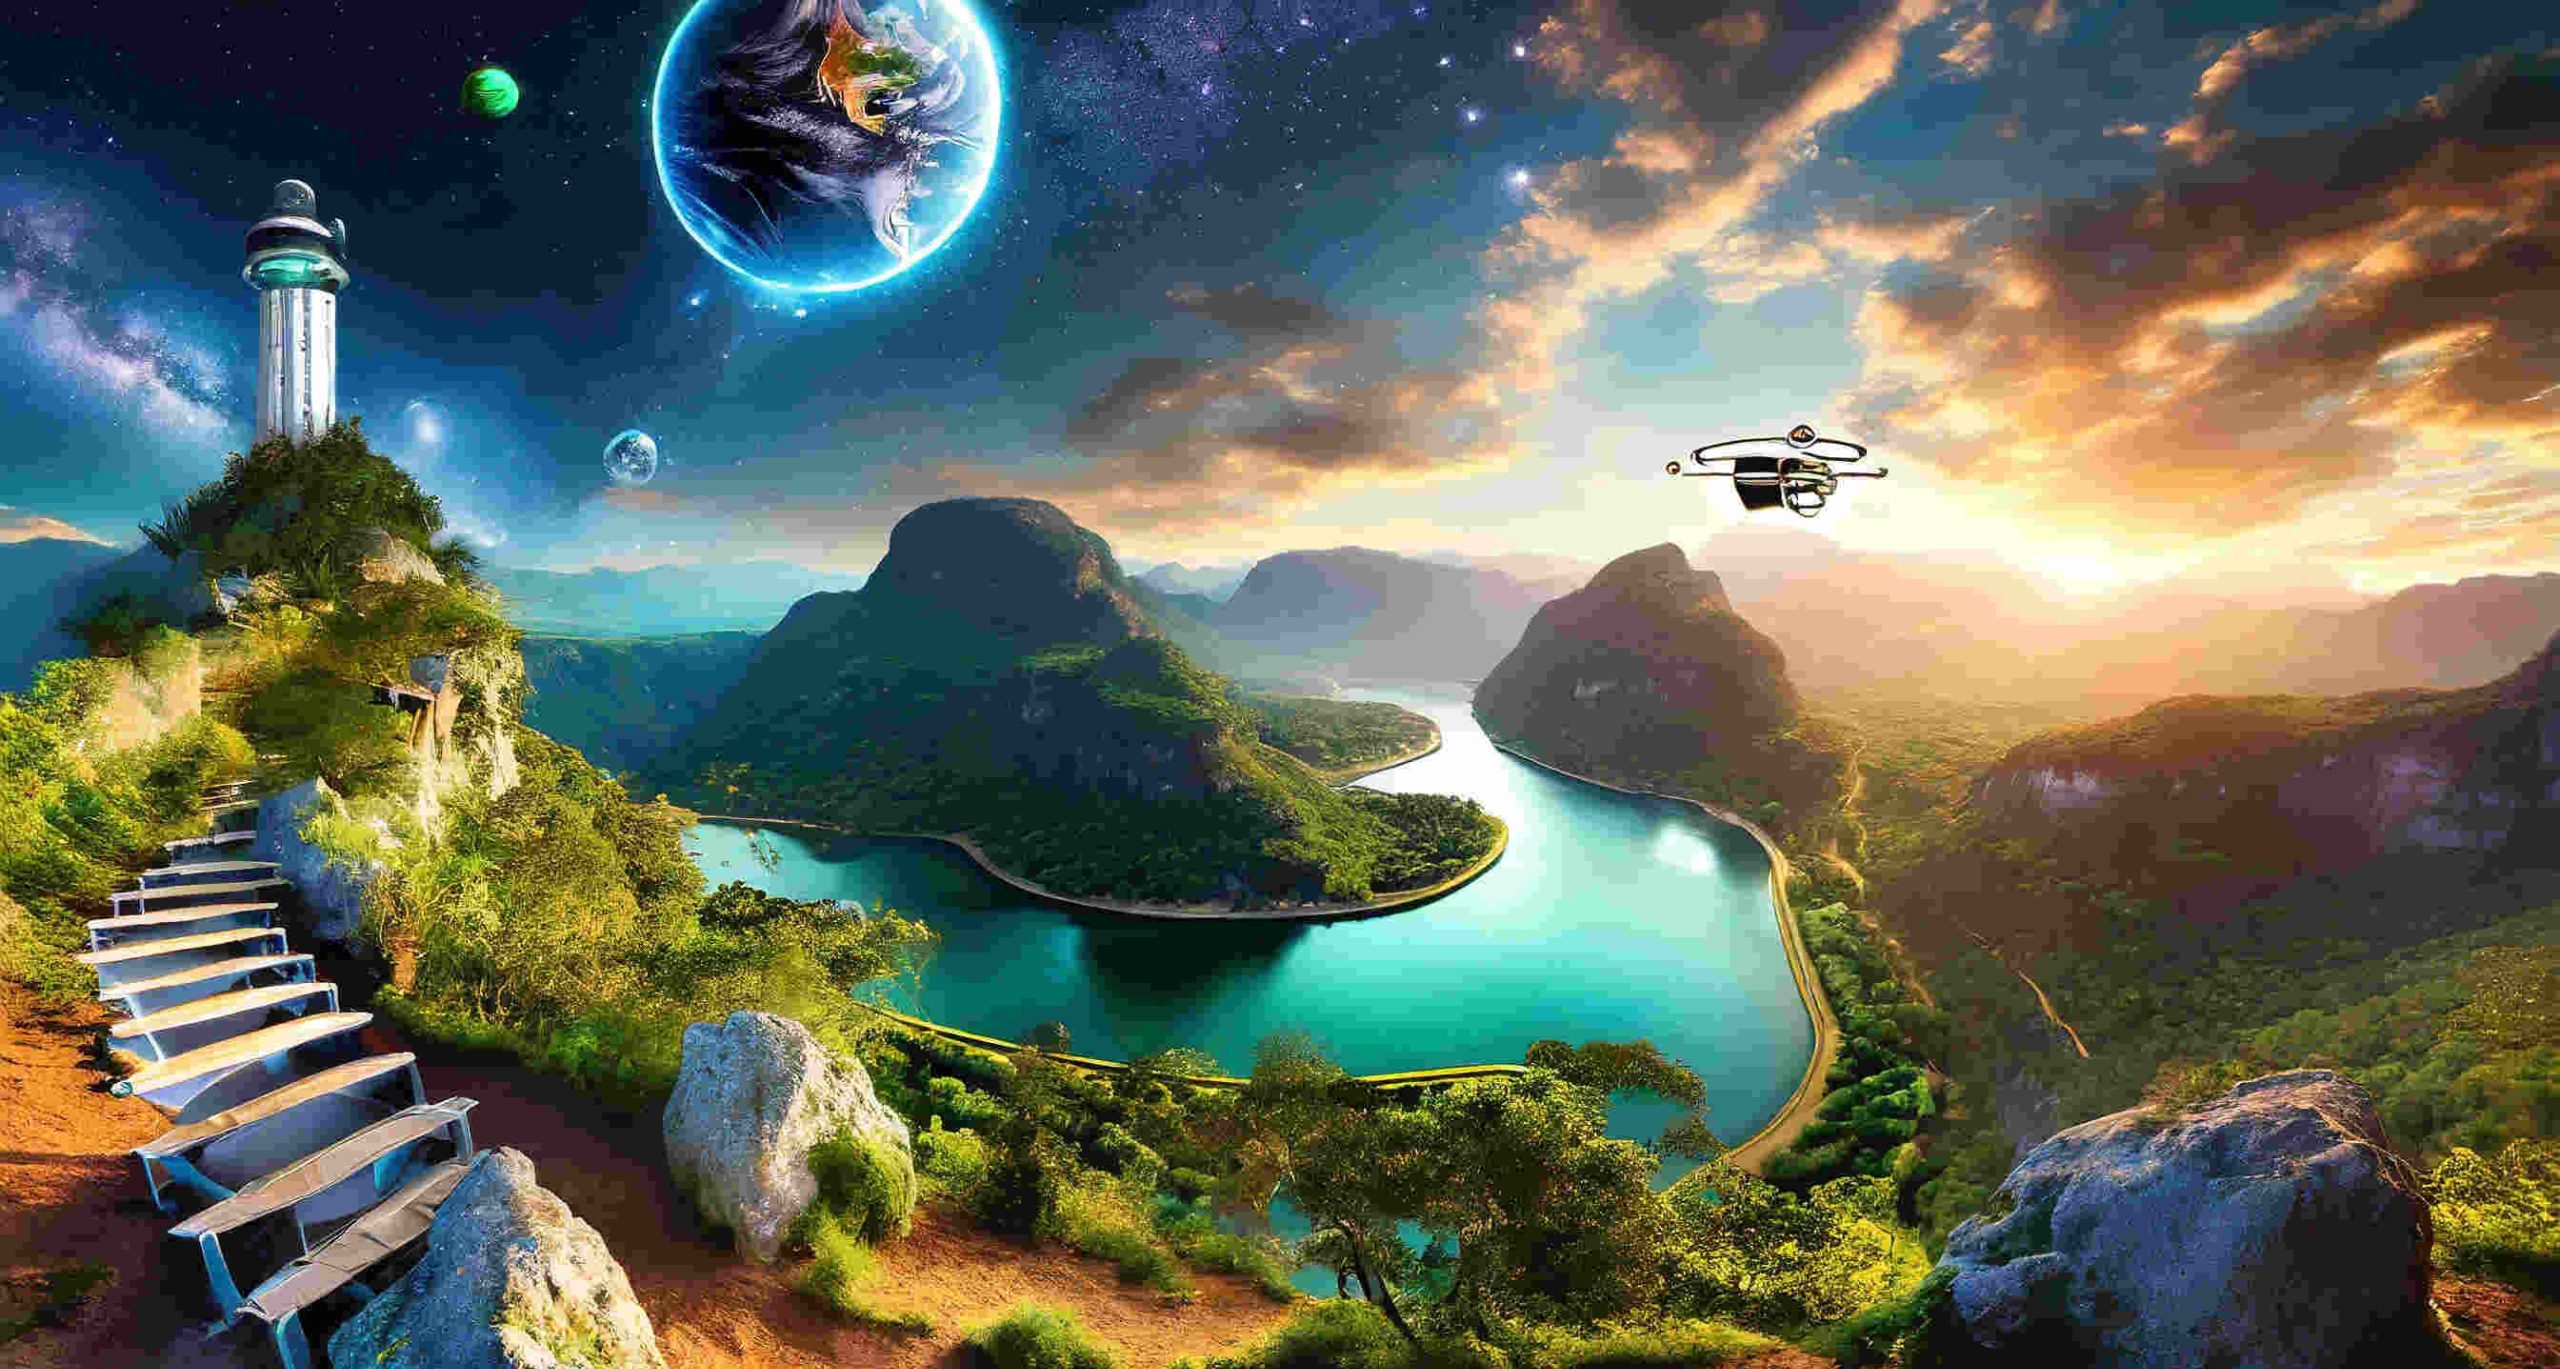 A captivating image symbolizing the future of travel 2024, featuring sustainable landscapes, virtual reality adventures, space tourism, smart travel tech, offbeat destinations, and wellness retreats. The blend of nature and innovation creates an exciting and harmonious visual narrative.